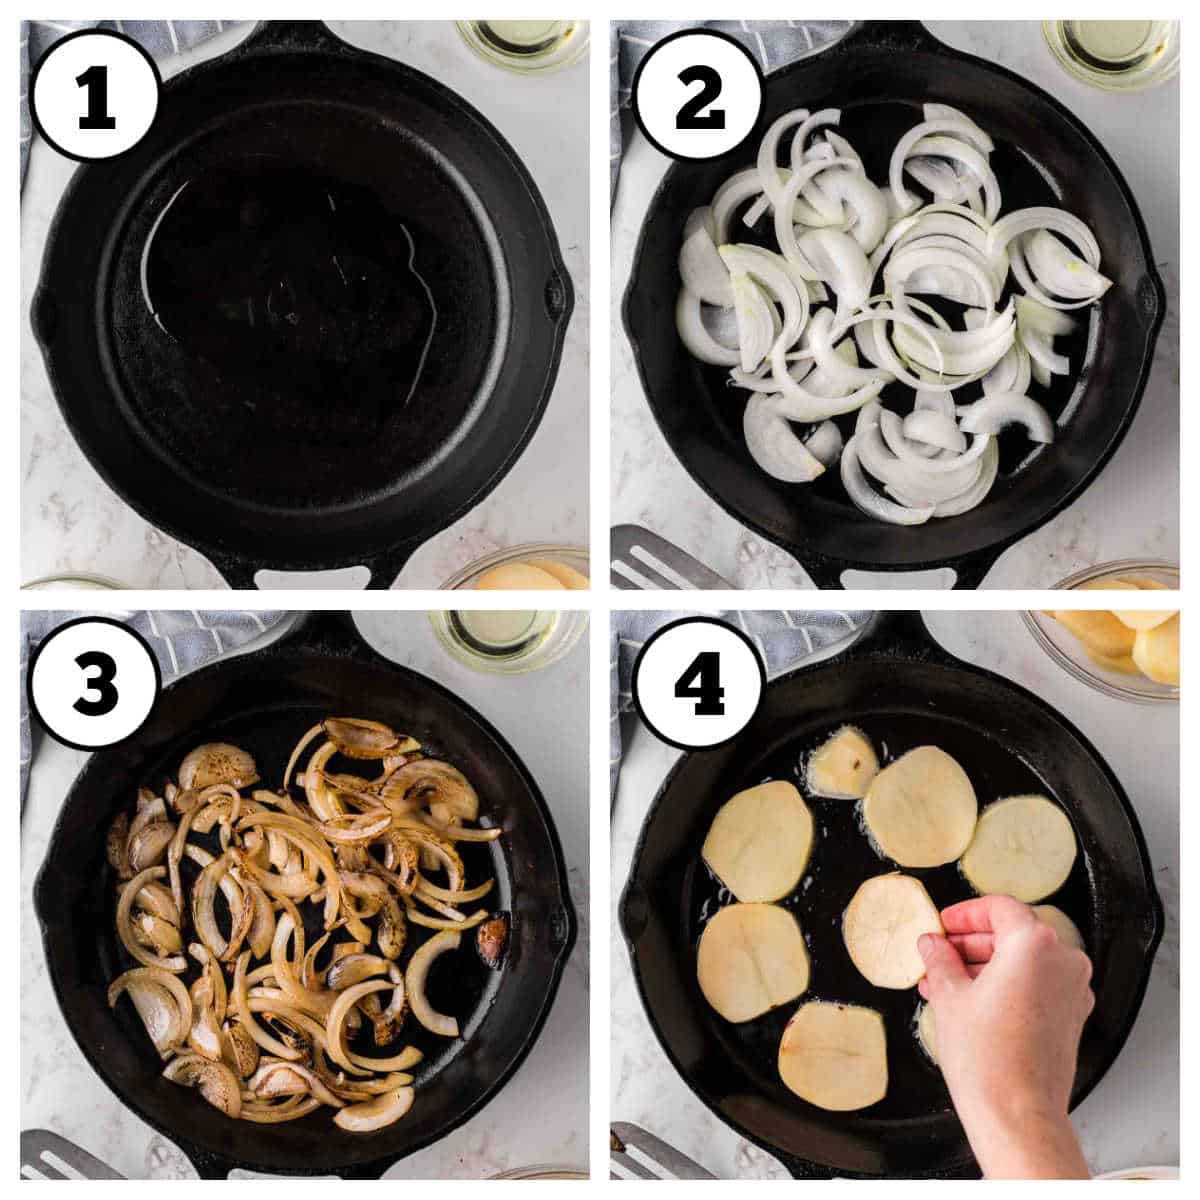 Steps 1-4 of how to make fried potatoes and onions.